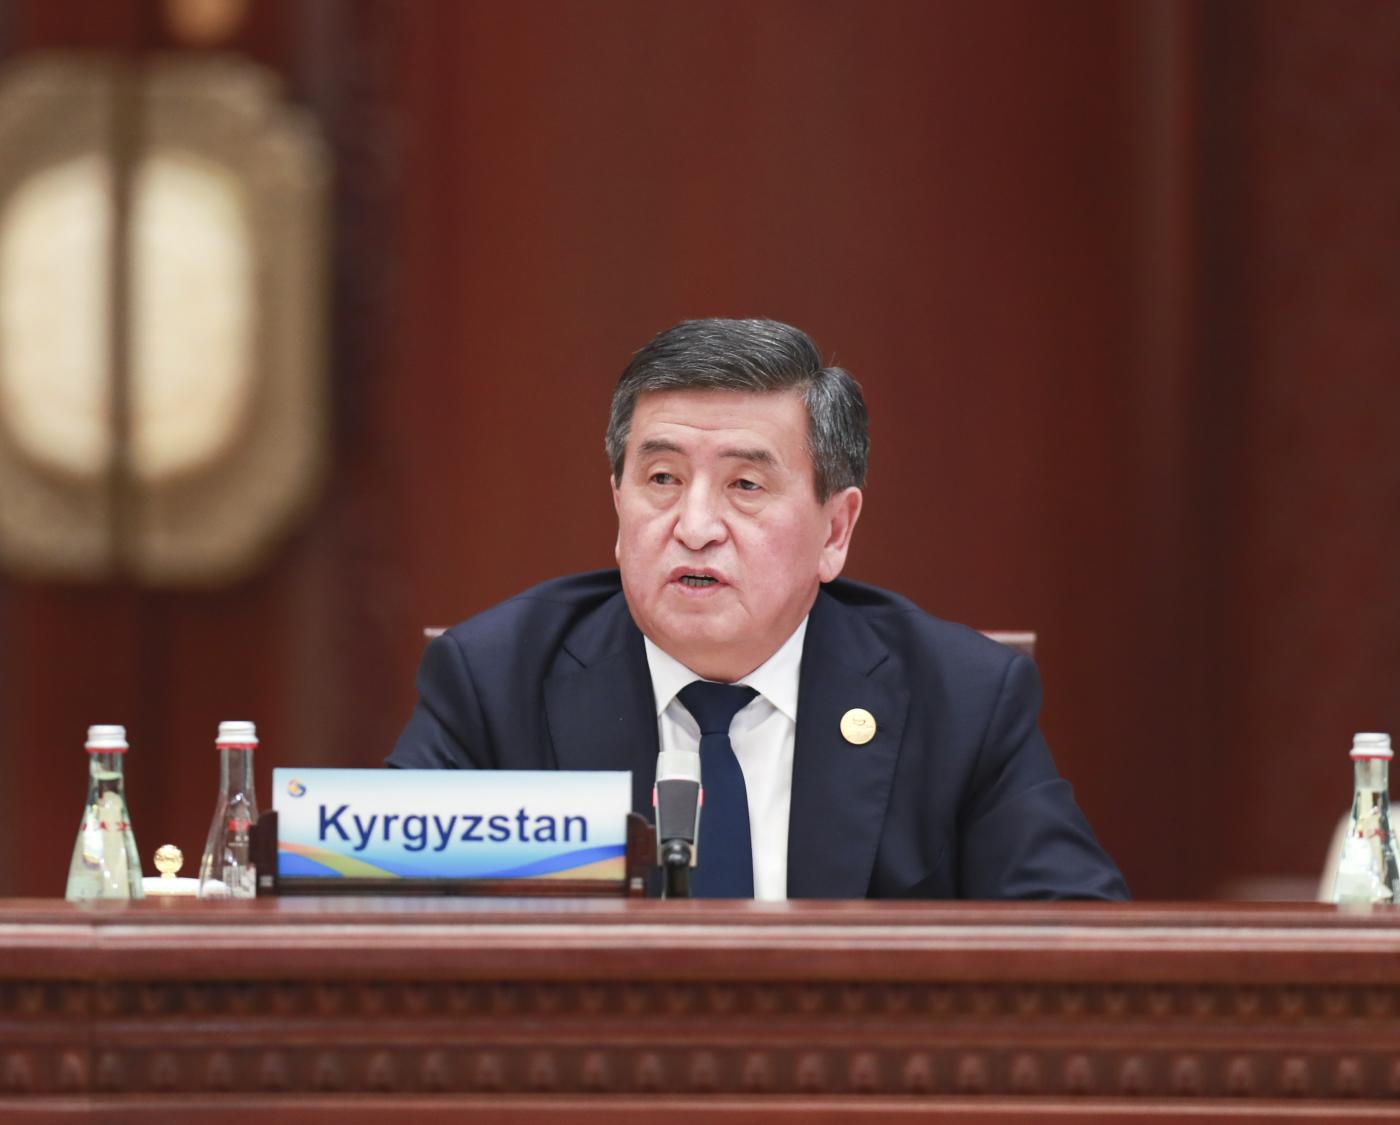 BEIJING, April 27, 2019 (Xinhua) -- Kyrgyz President Sooronbay Jeenbekov speaks at the leaders' roundtable meeting of the Second Belt and Road Forum for International Cooperation at the Yanqi Lake International Convention Center in Beijing, capital of China, April 27, 2019. (Xinhua/Pang Xinglei/IANS) by .